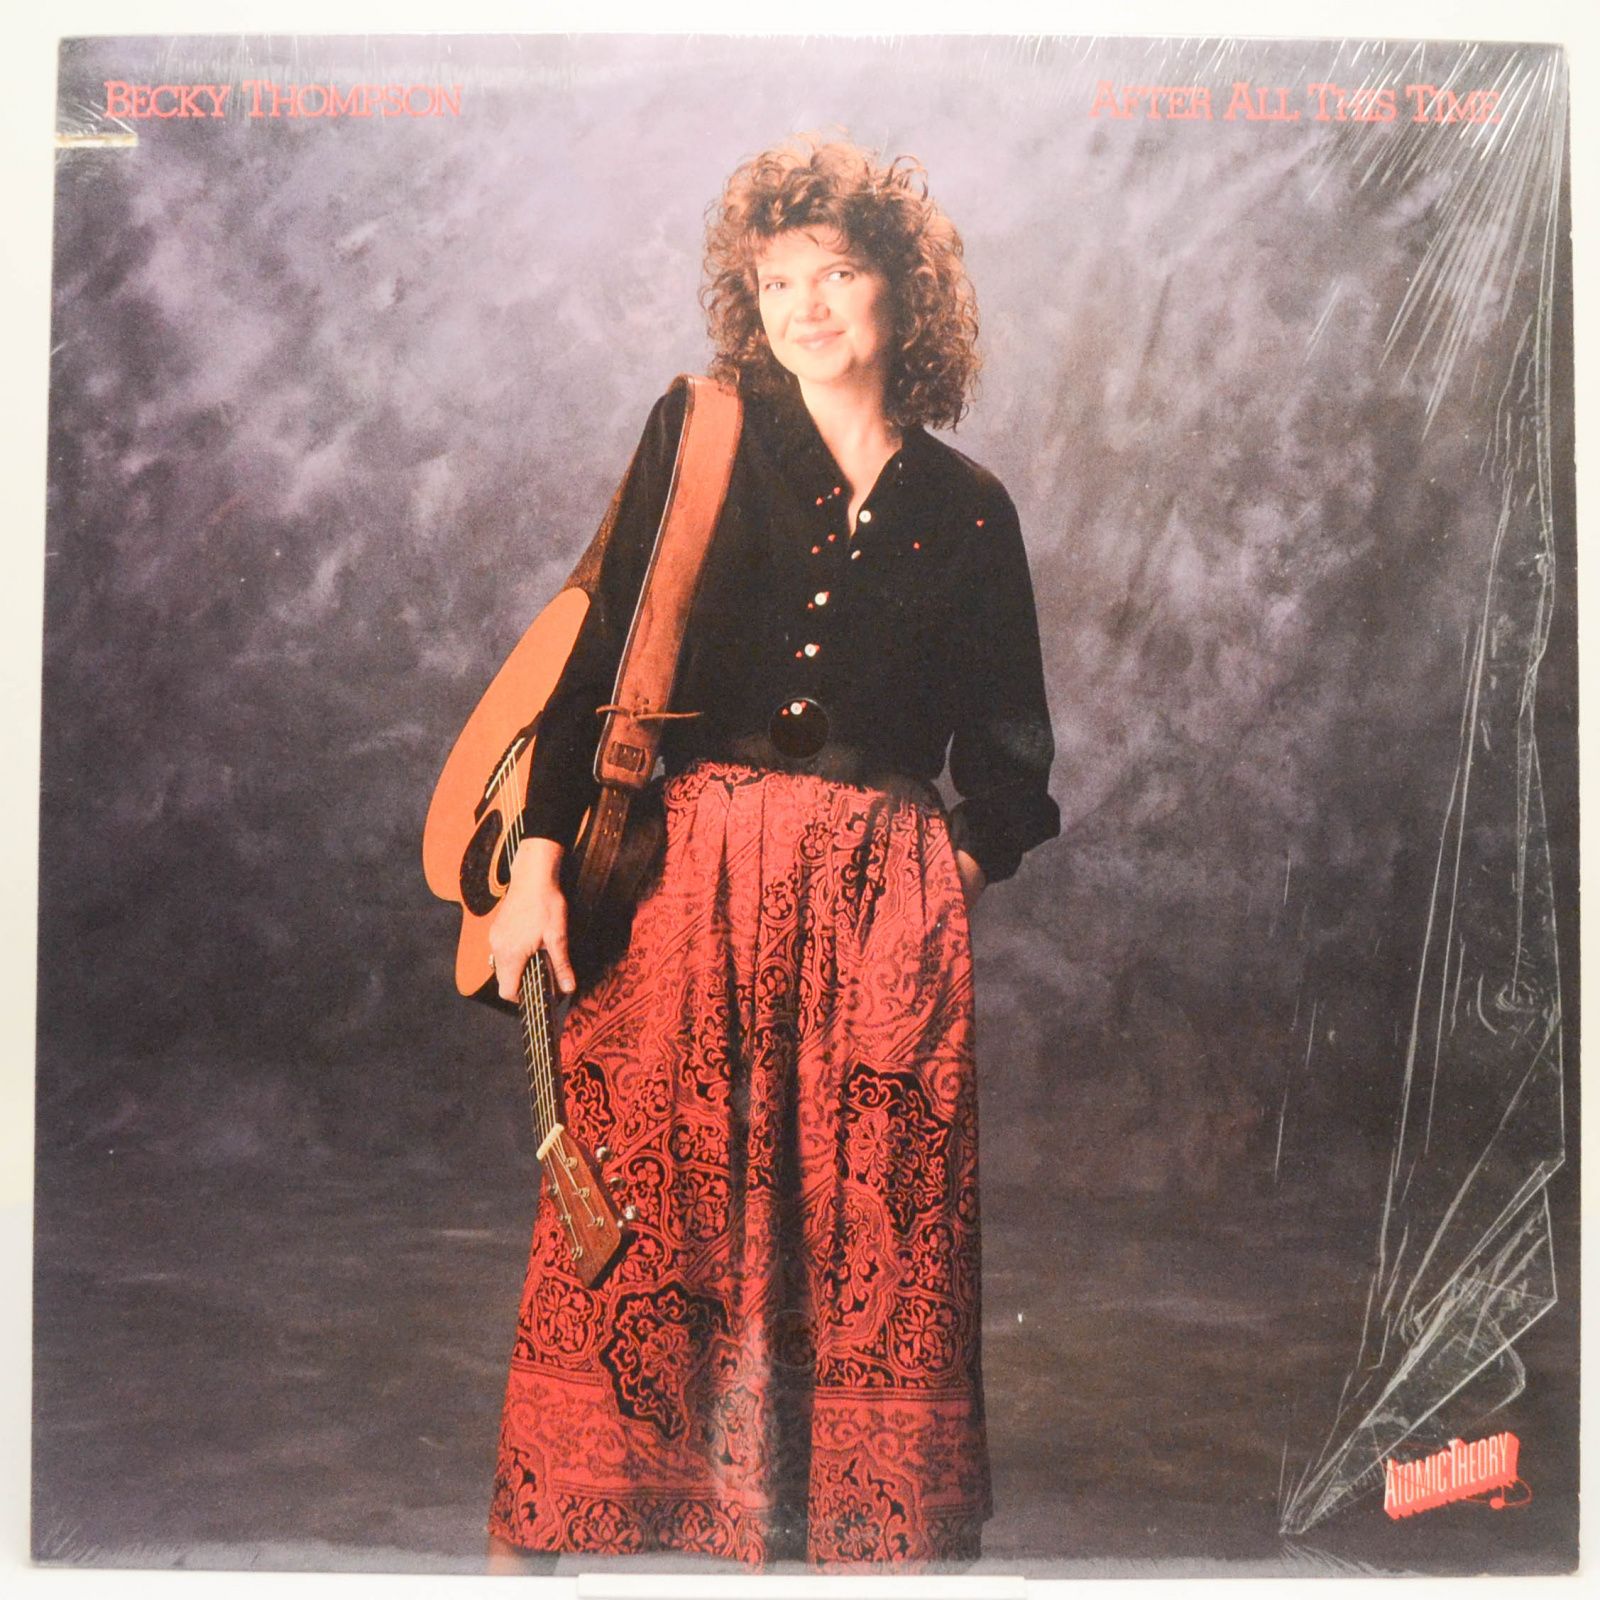 Becky Thompson — After All This Time, 1988